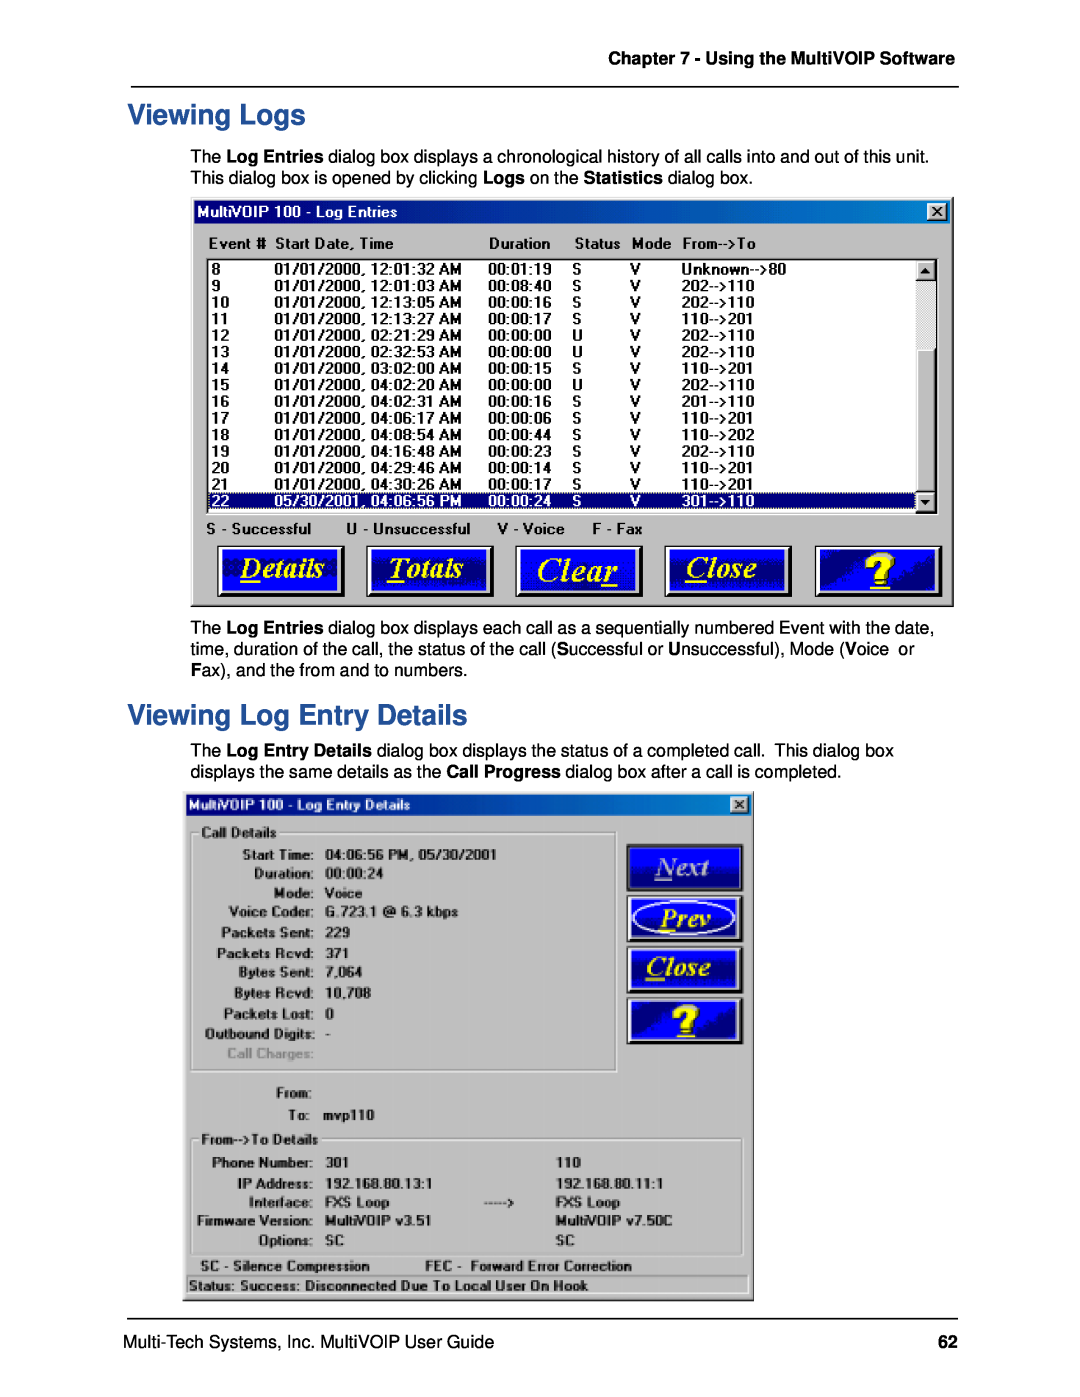 Multi-Tech Systems MVP120 manual Viewing Logs, Viewing Log Entry Details, Using the MultiVOIP Software 